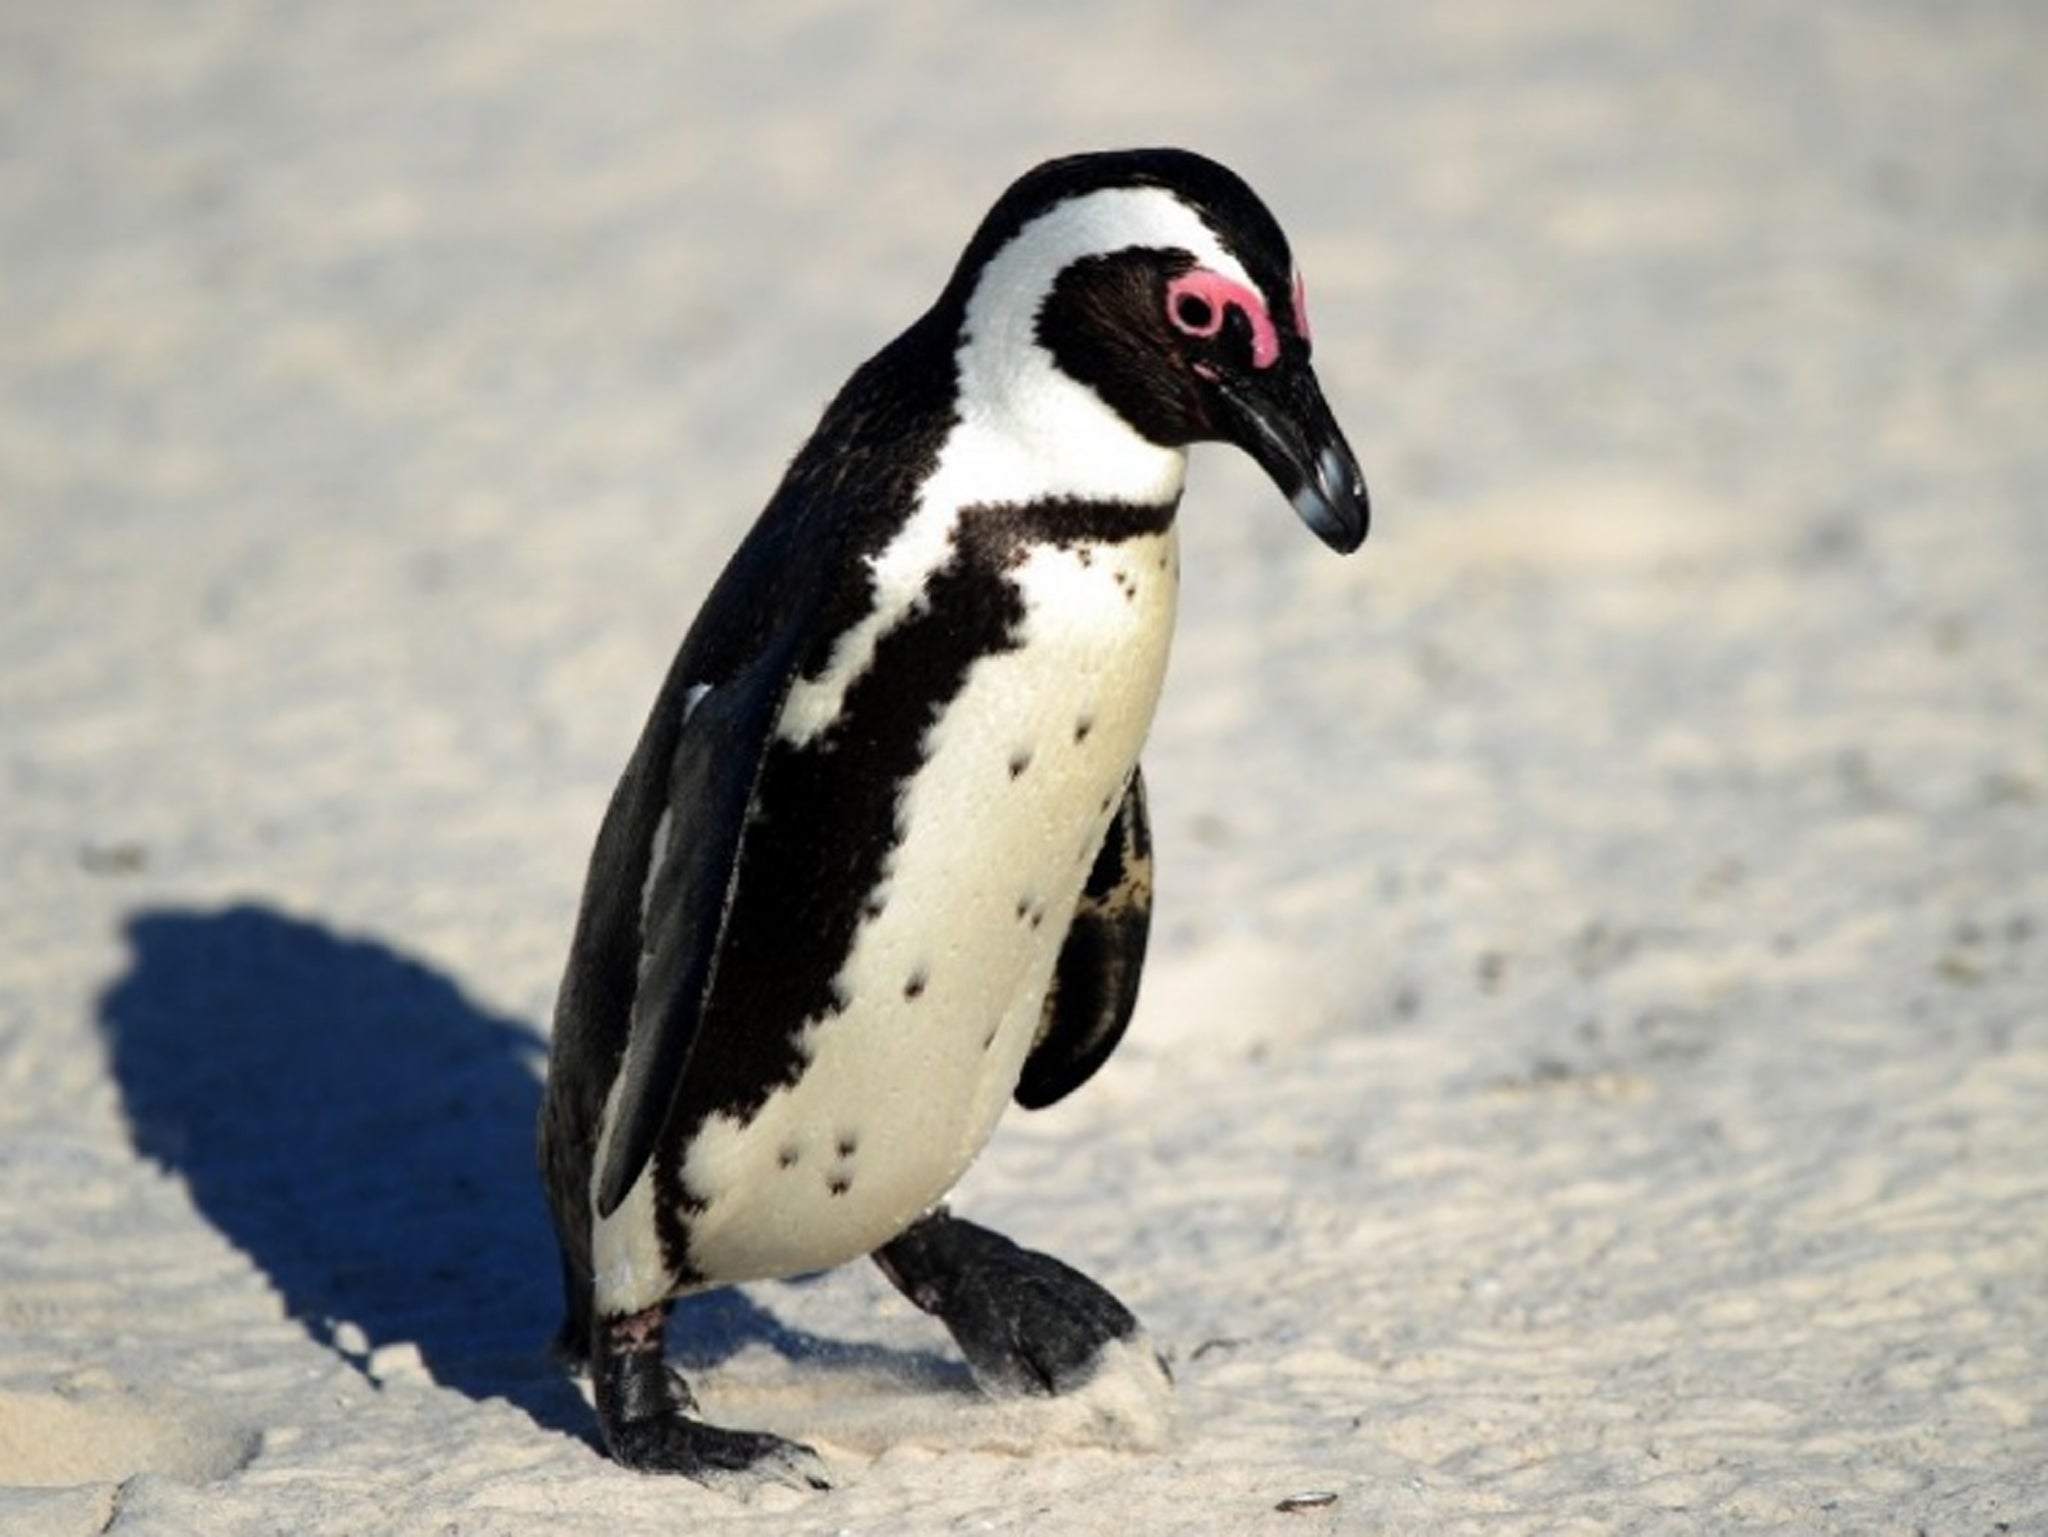 An African penguin (Spheniscus demersus), also known as a black-footed penguin, at Table Mountain National Park, near Cape Town in South Africa